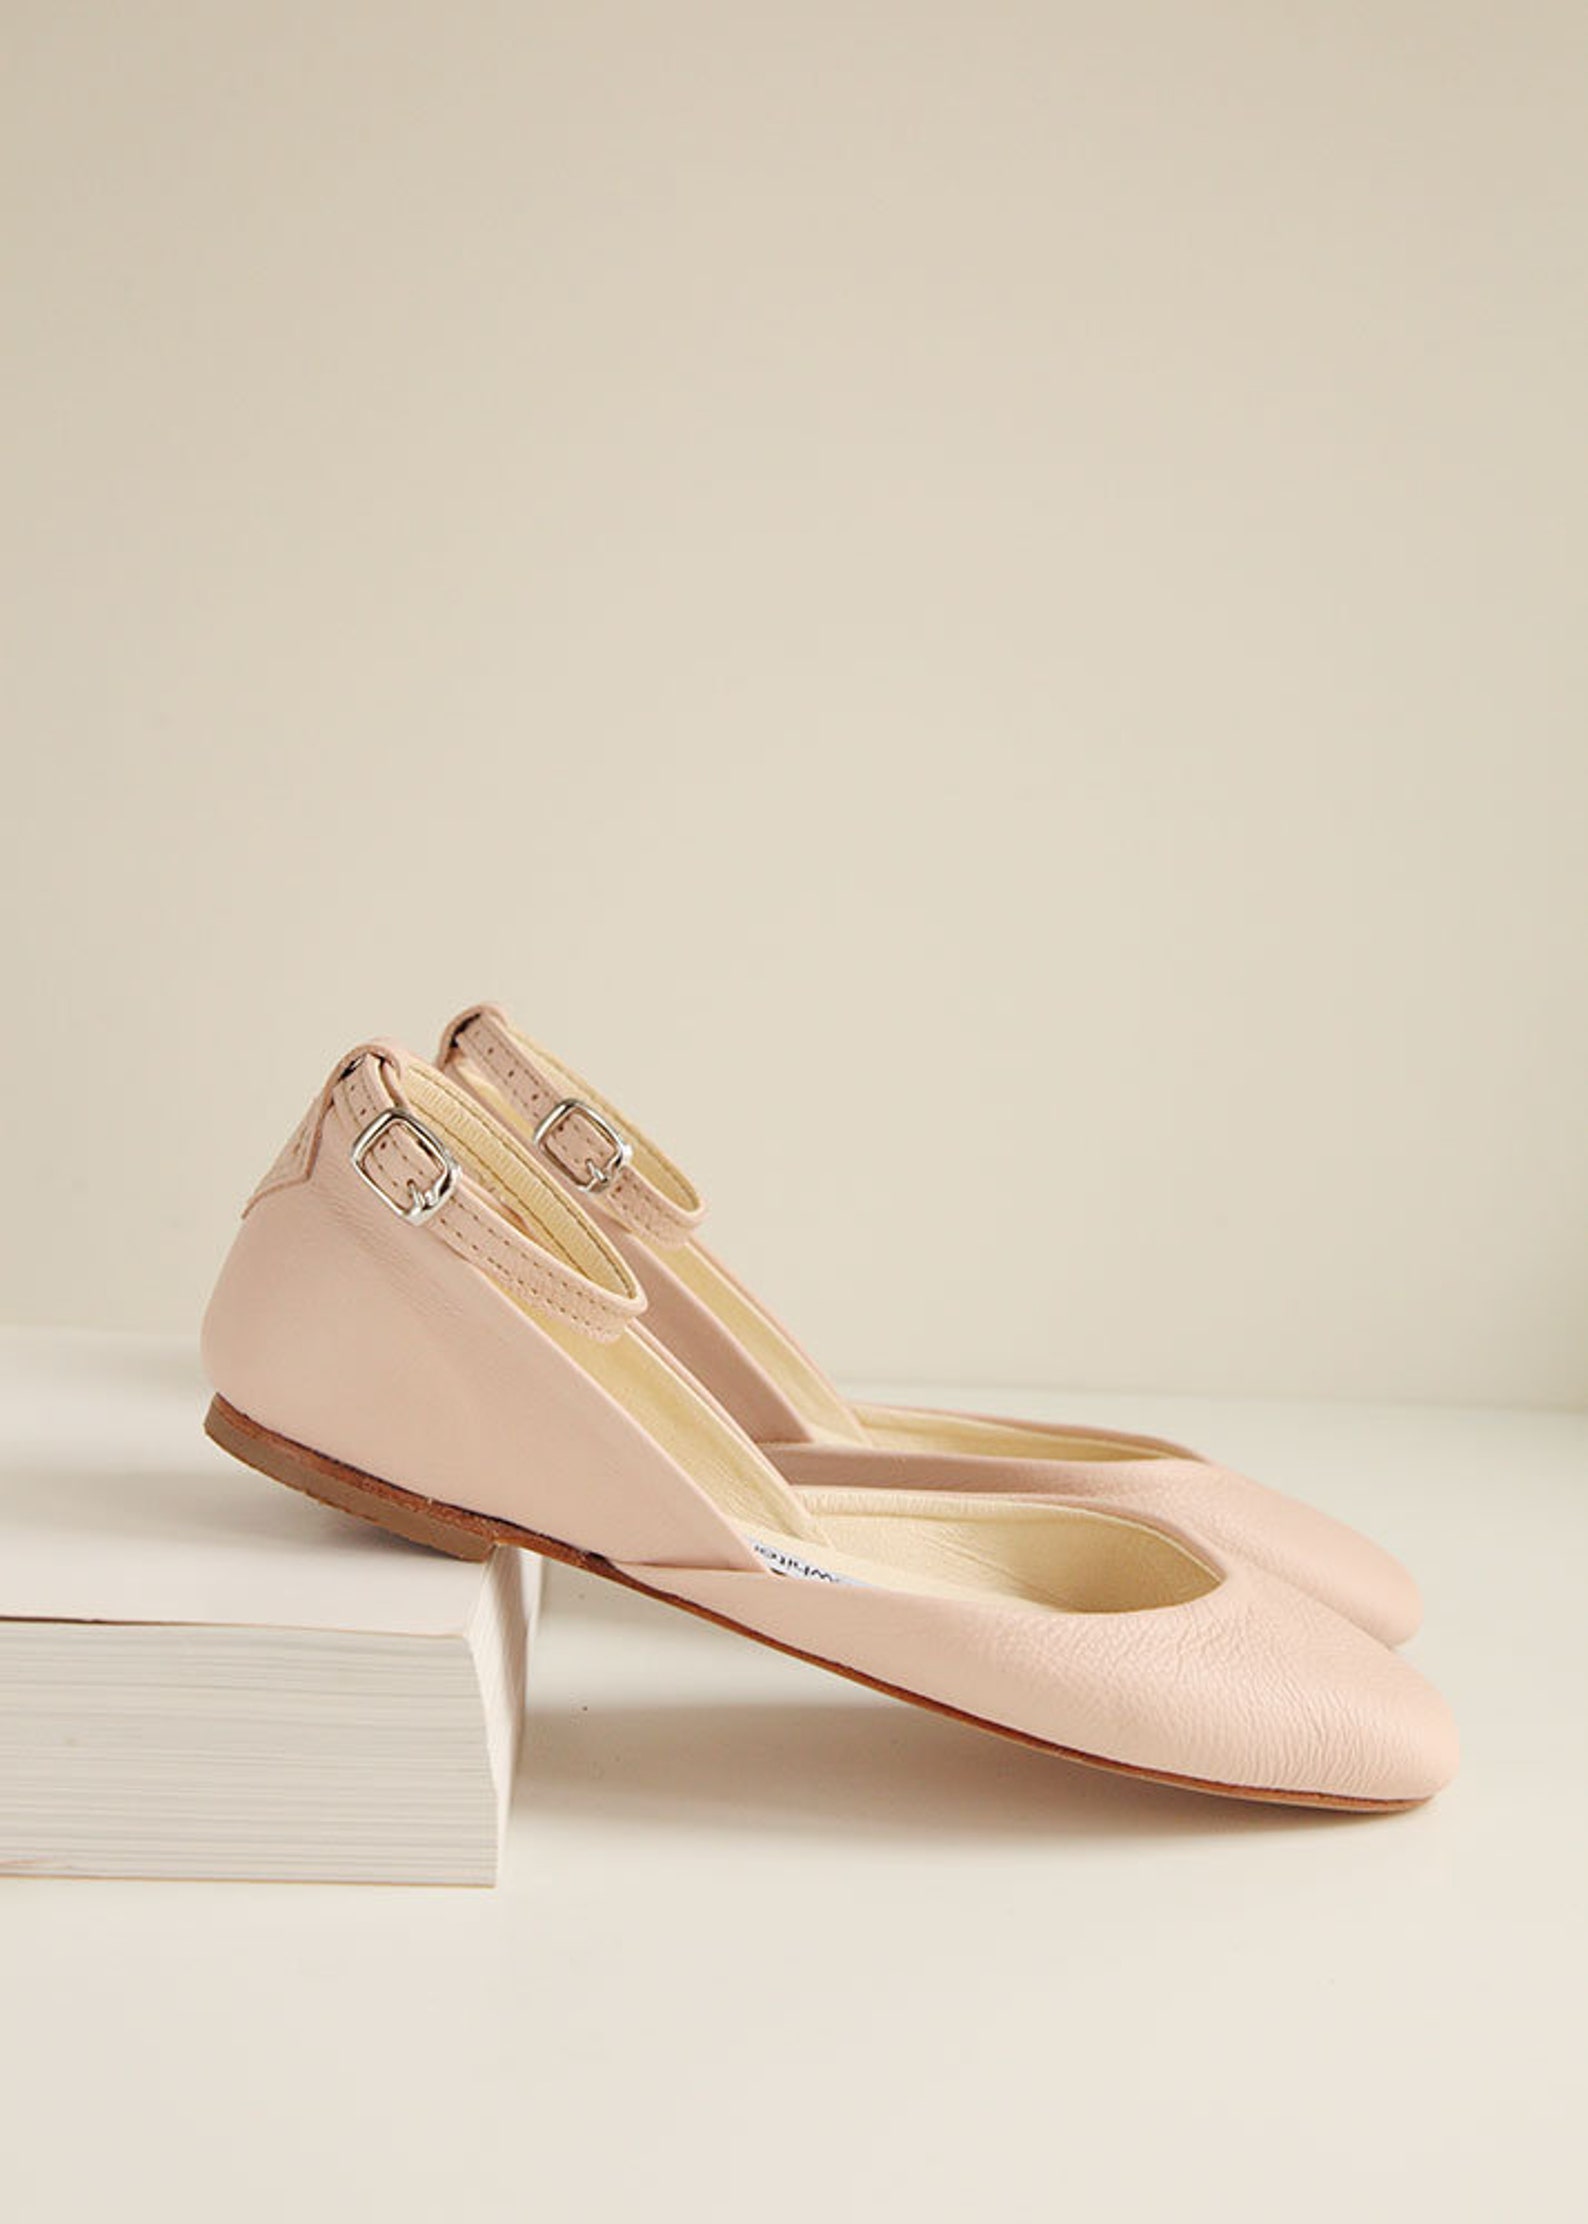 the nude blush wedding ballet flats | bridal leather shoes with satin ribbons | nude with satin ribbons | ready to ship